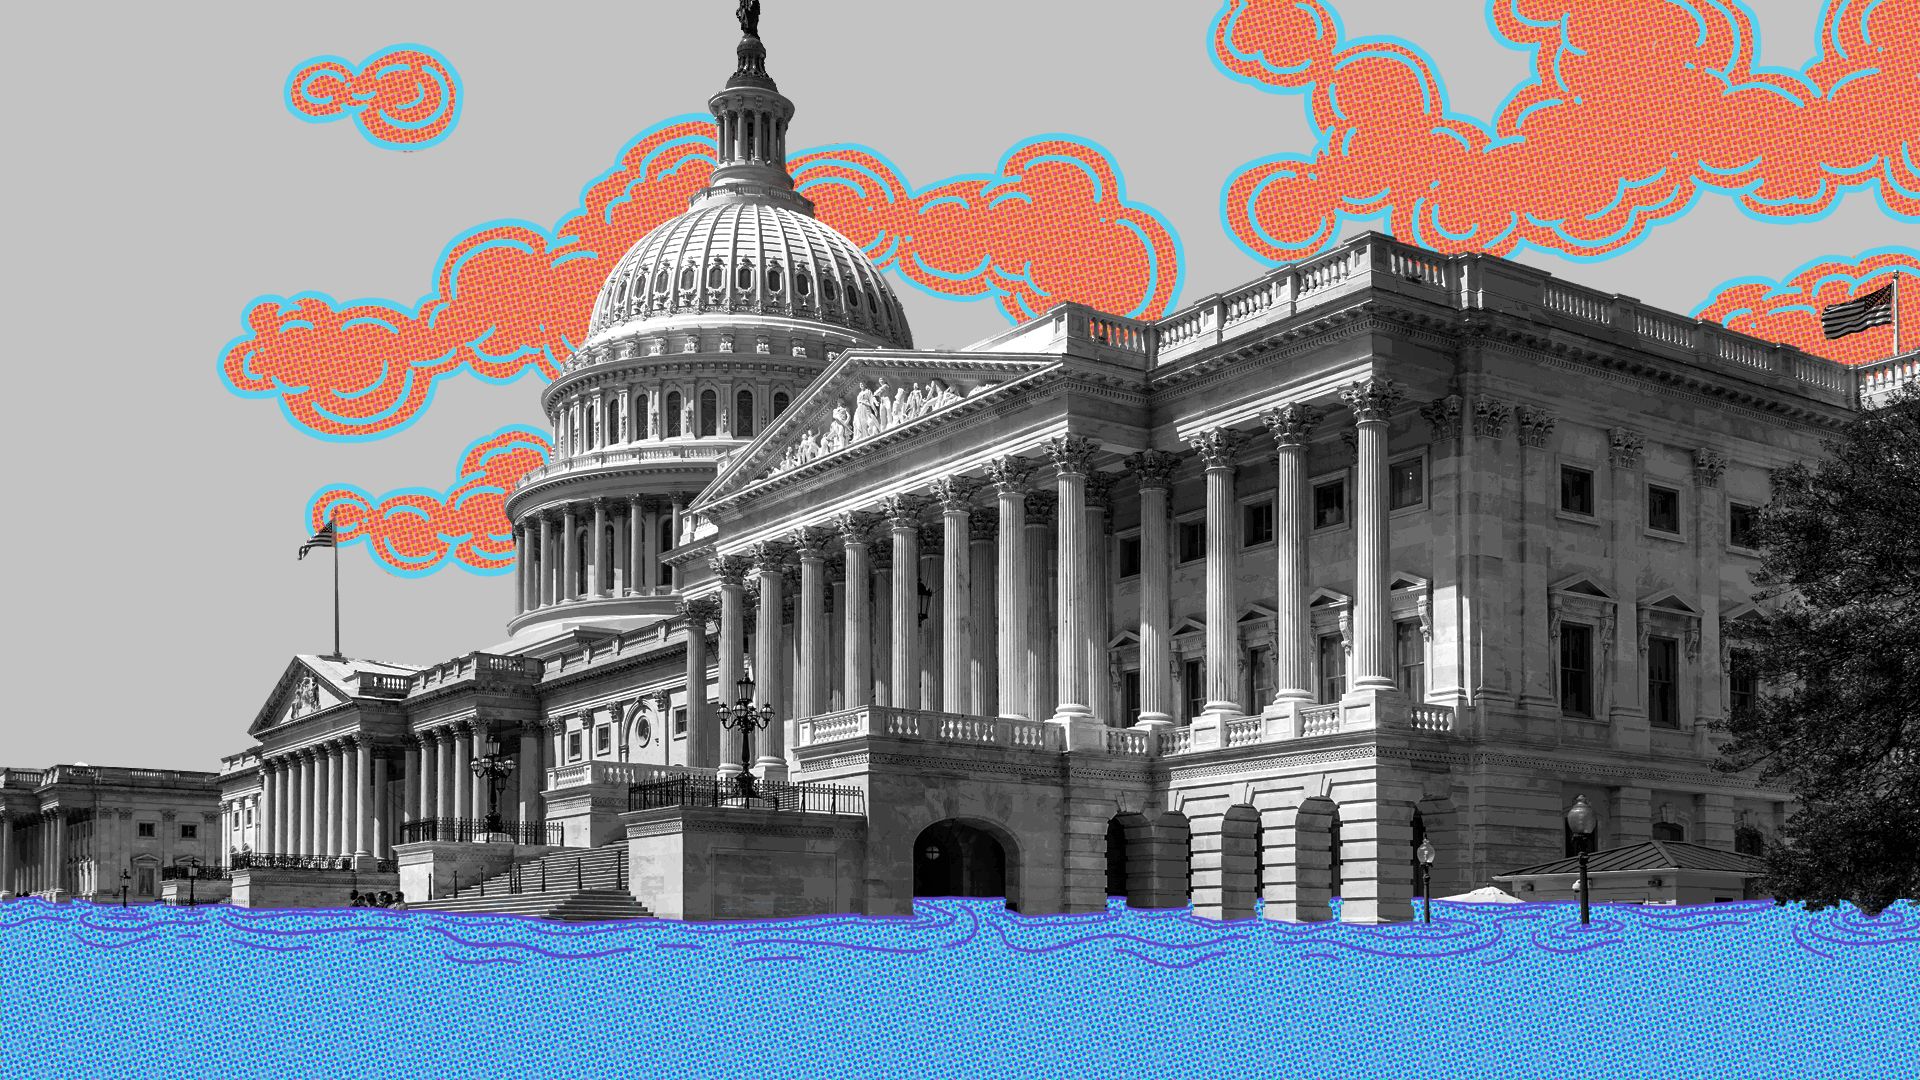 In this illustration, water fills up the ground outside the Capitol building.